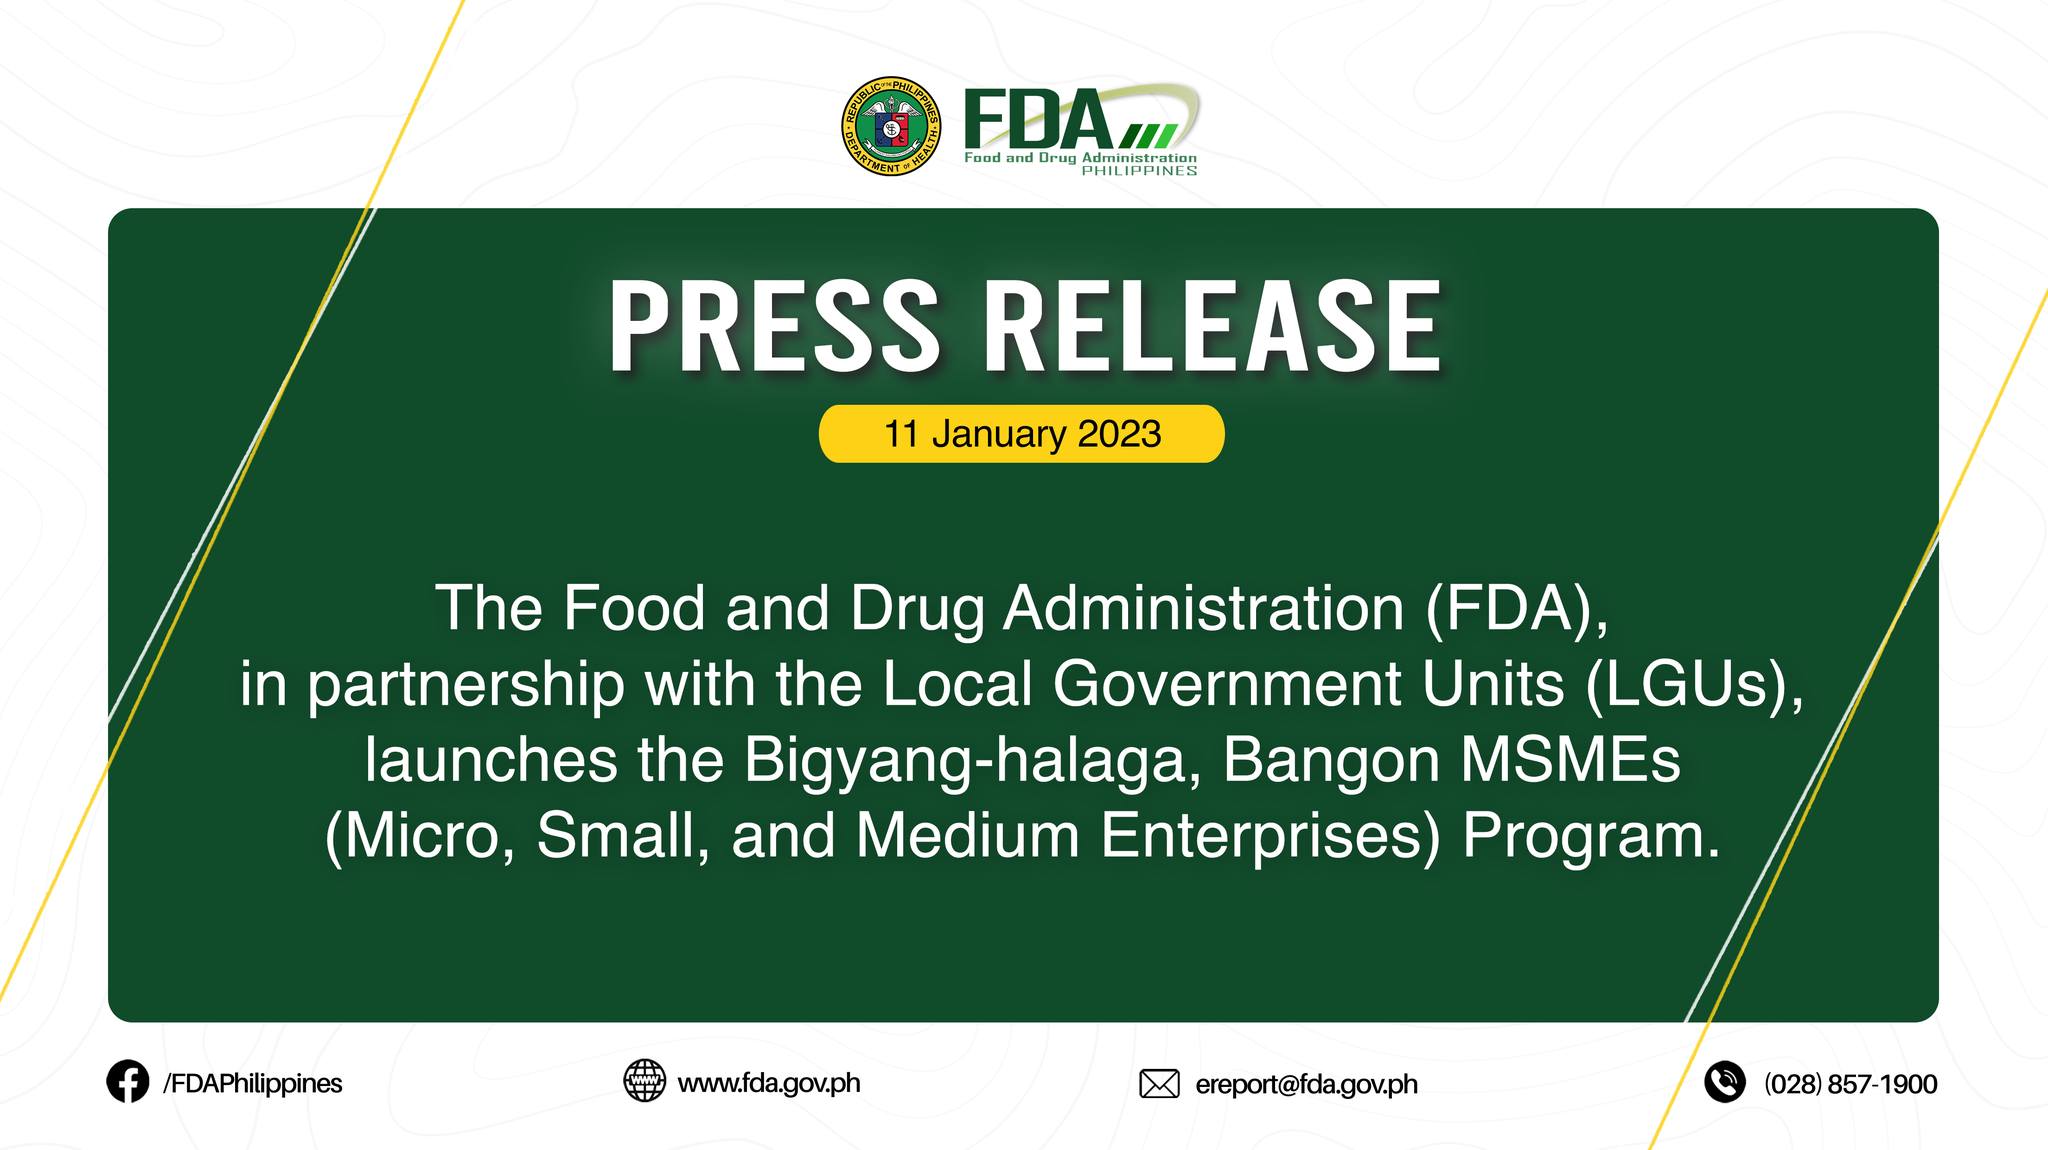 Press Release || The Food and Drug Administration (FDA), in partnership with the Local Government Units (LGUs), launches the Bigyang-halaga, Bangon MSMEs (Micro, Small, and Medium Enterprises) Program.